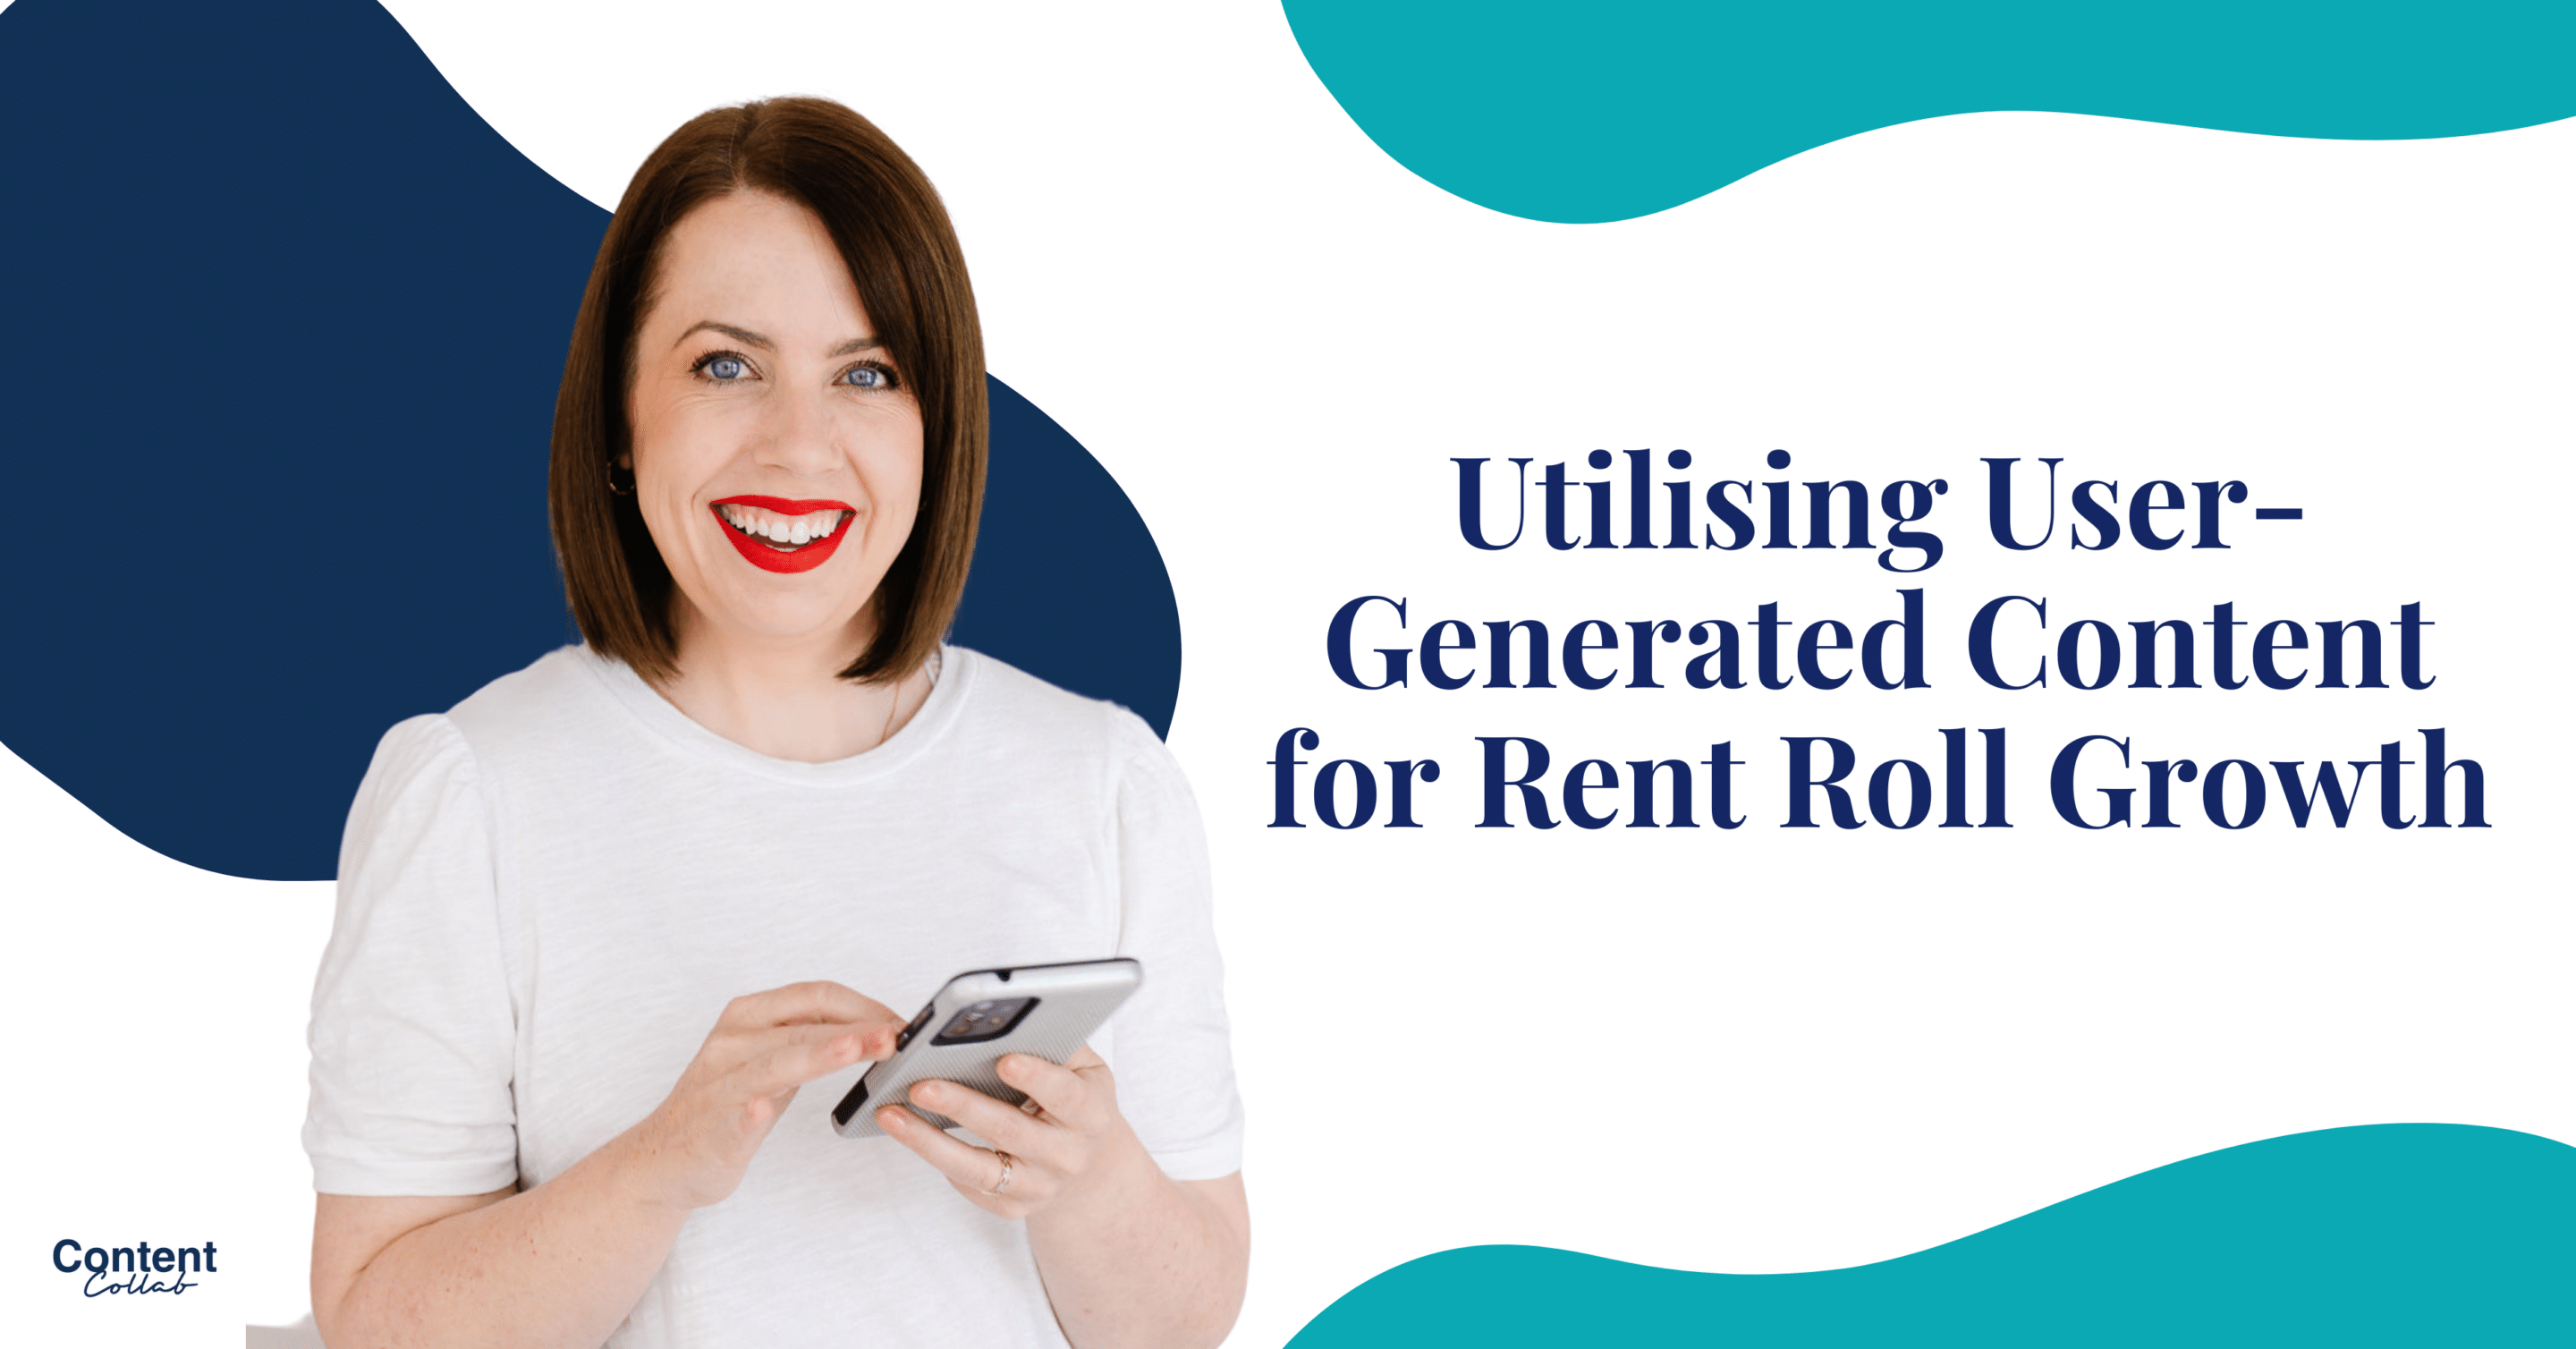 Utilising User-Generated Content for Rent Roll Growth